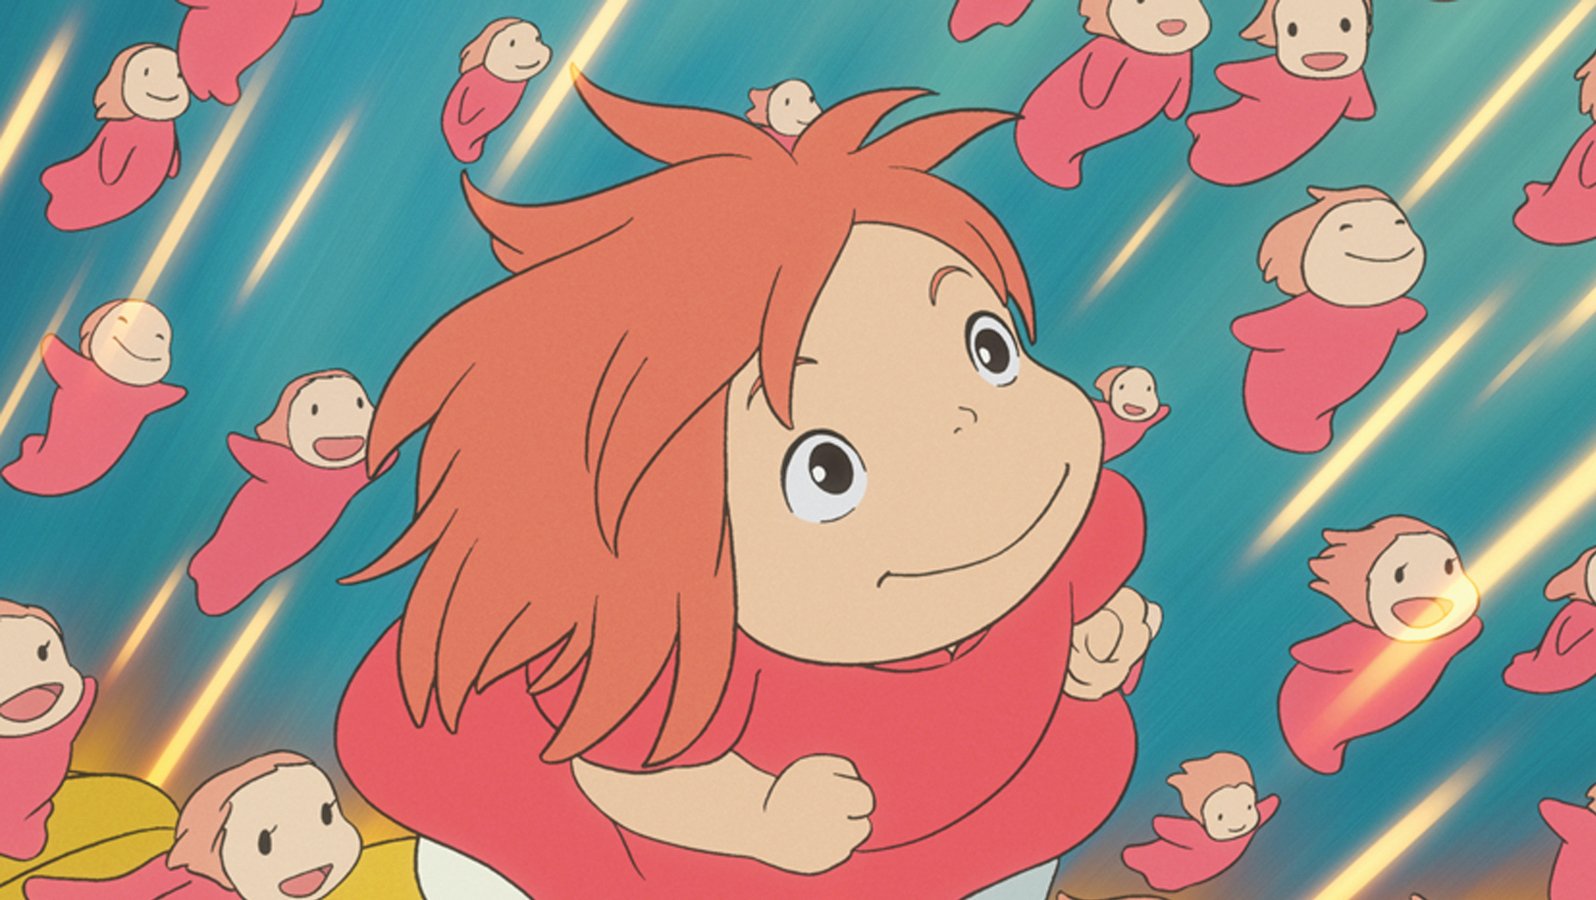 a red-headed girl in a red dress swims with small fish creatures that look like her